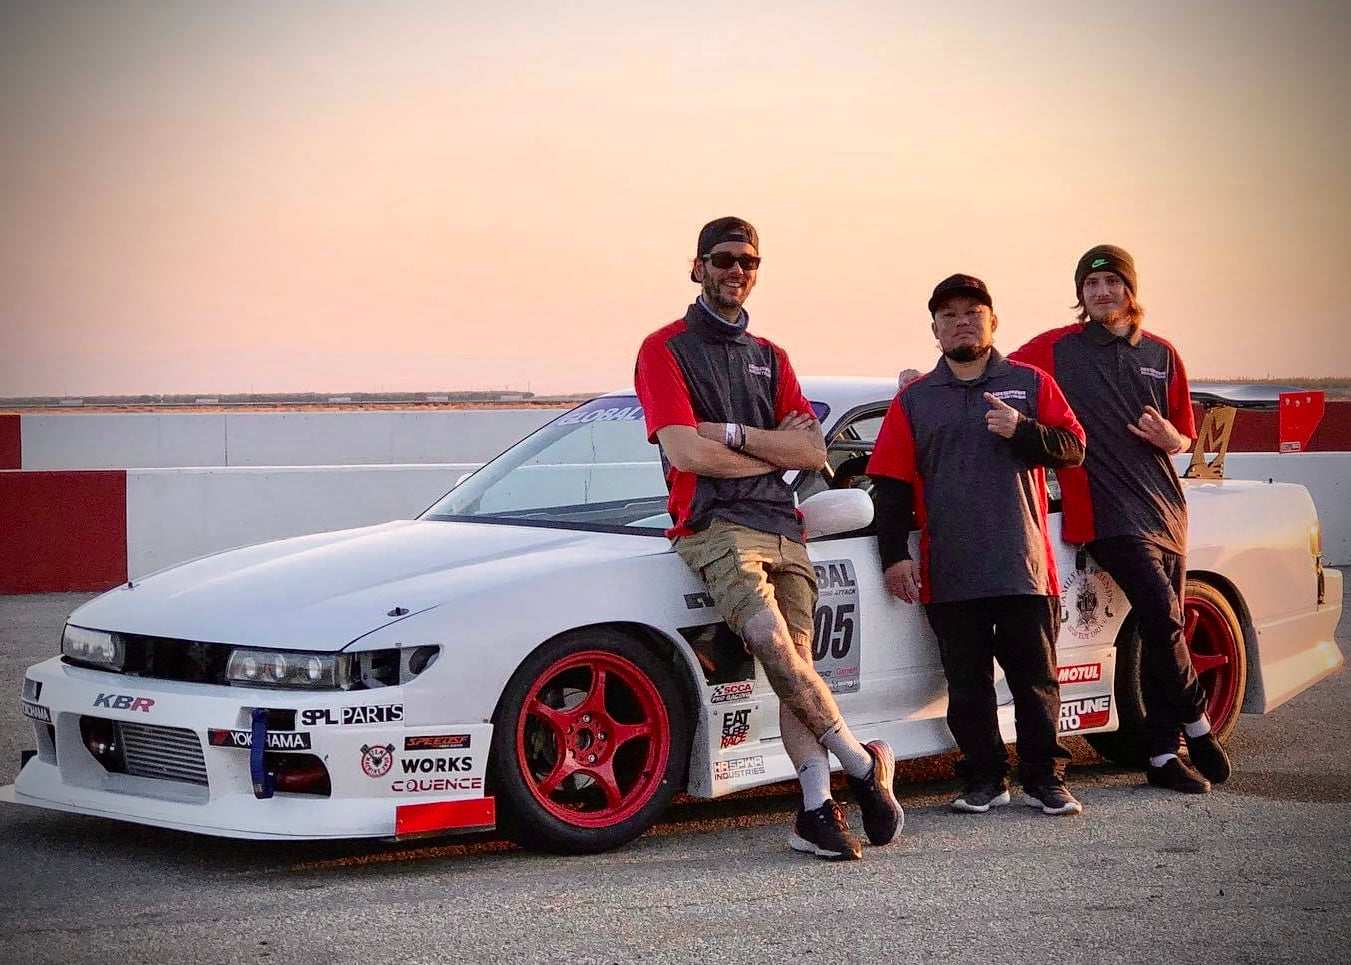 HRSPWR Industries racing team in front of white s13